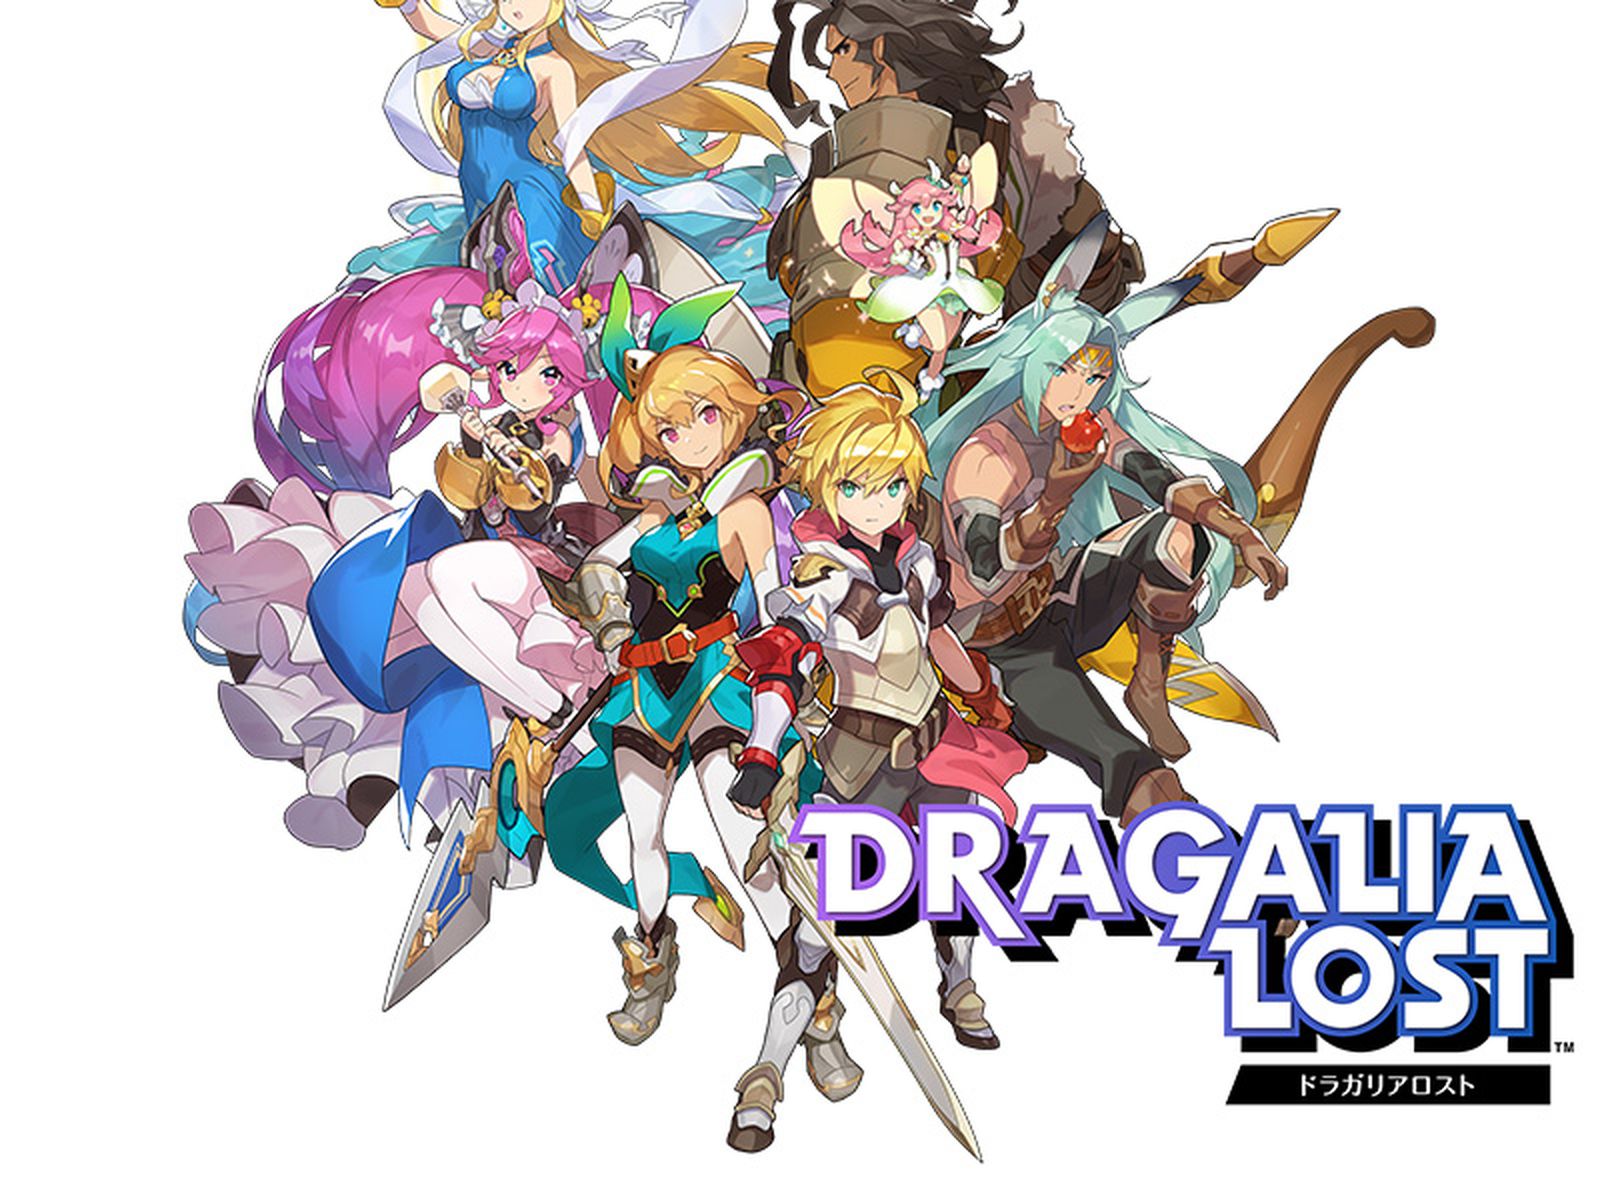 Nintendo Reveals New Action Rpg Dragalia Lost Coming To Smartphones Later This Year Macrumors